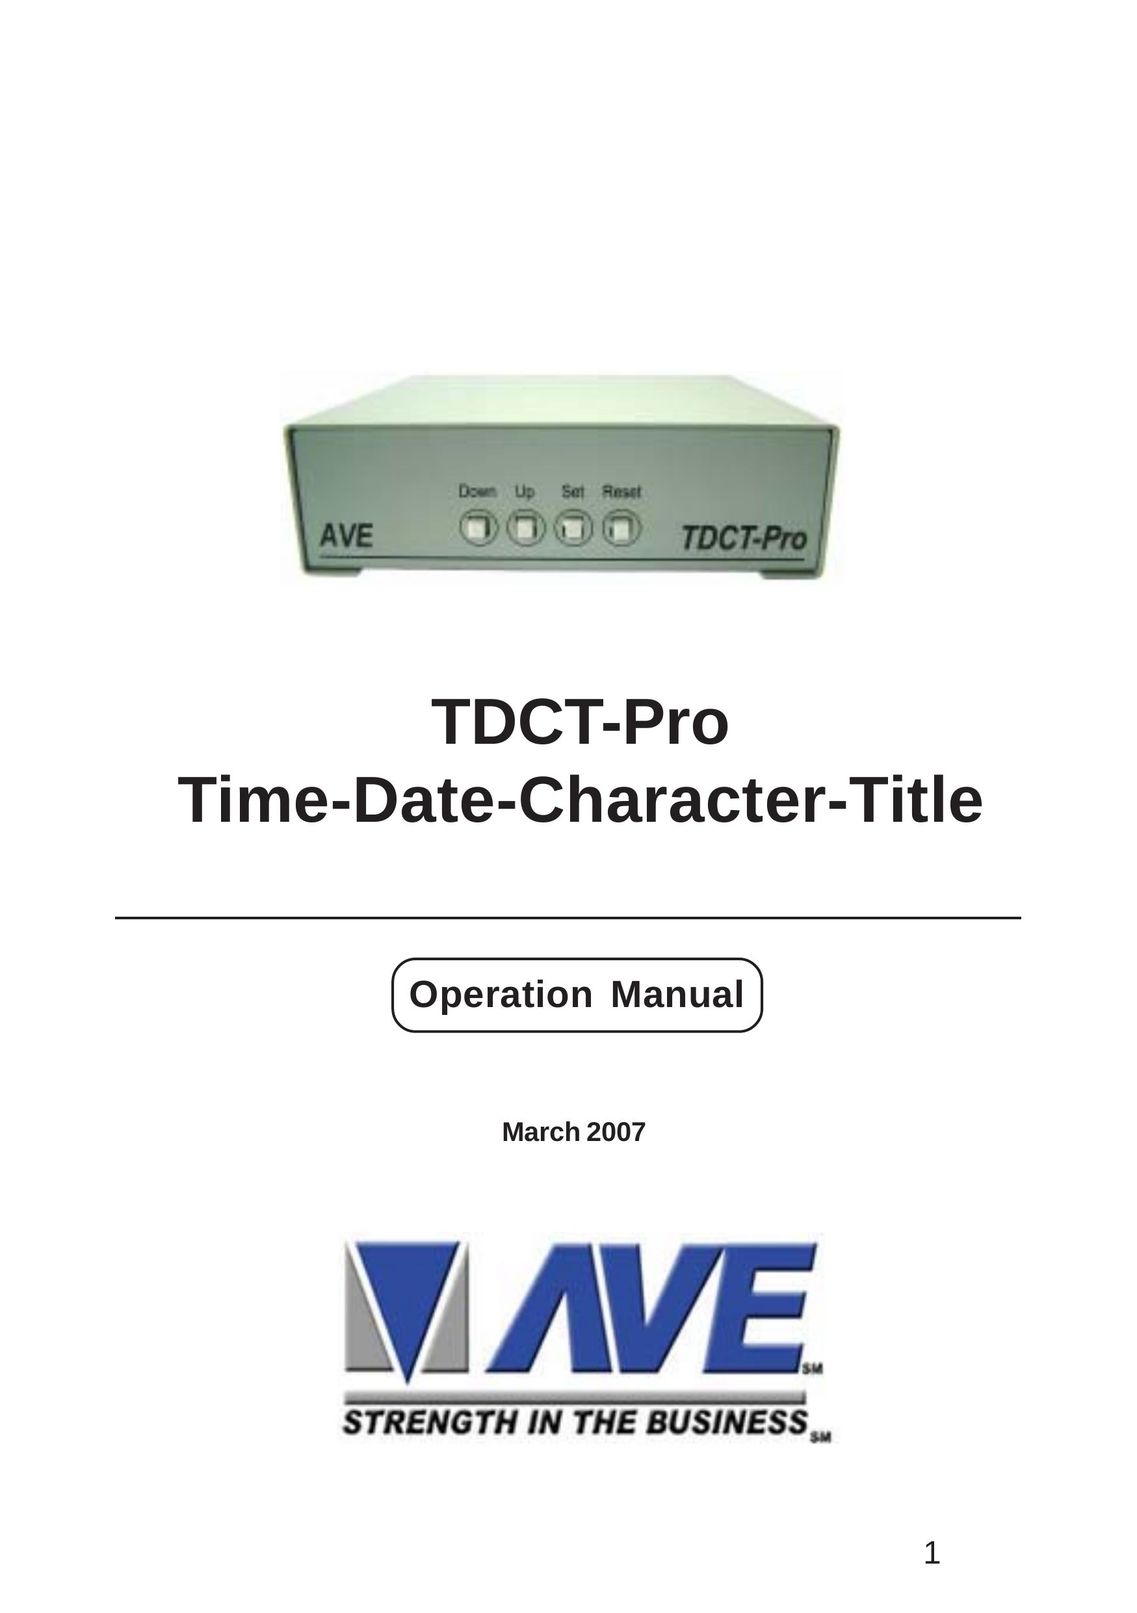 AVE TDCT-Pro Network Card User Manual